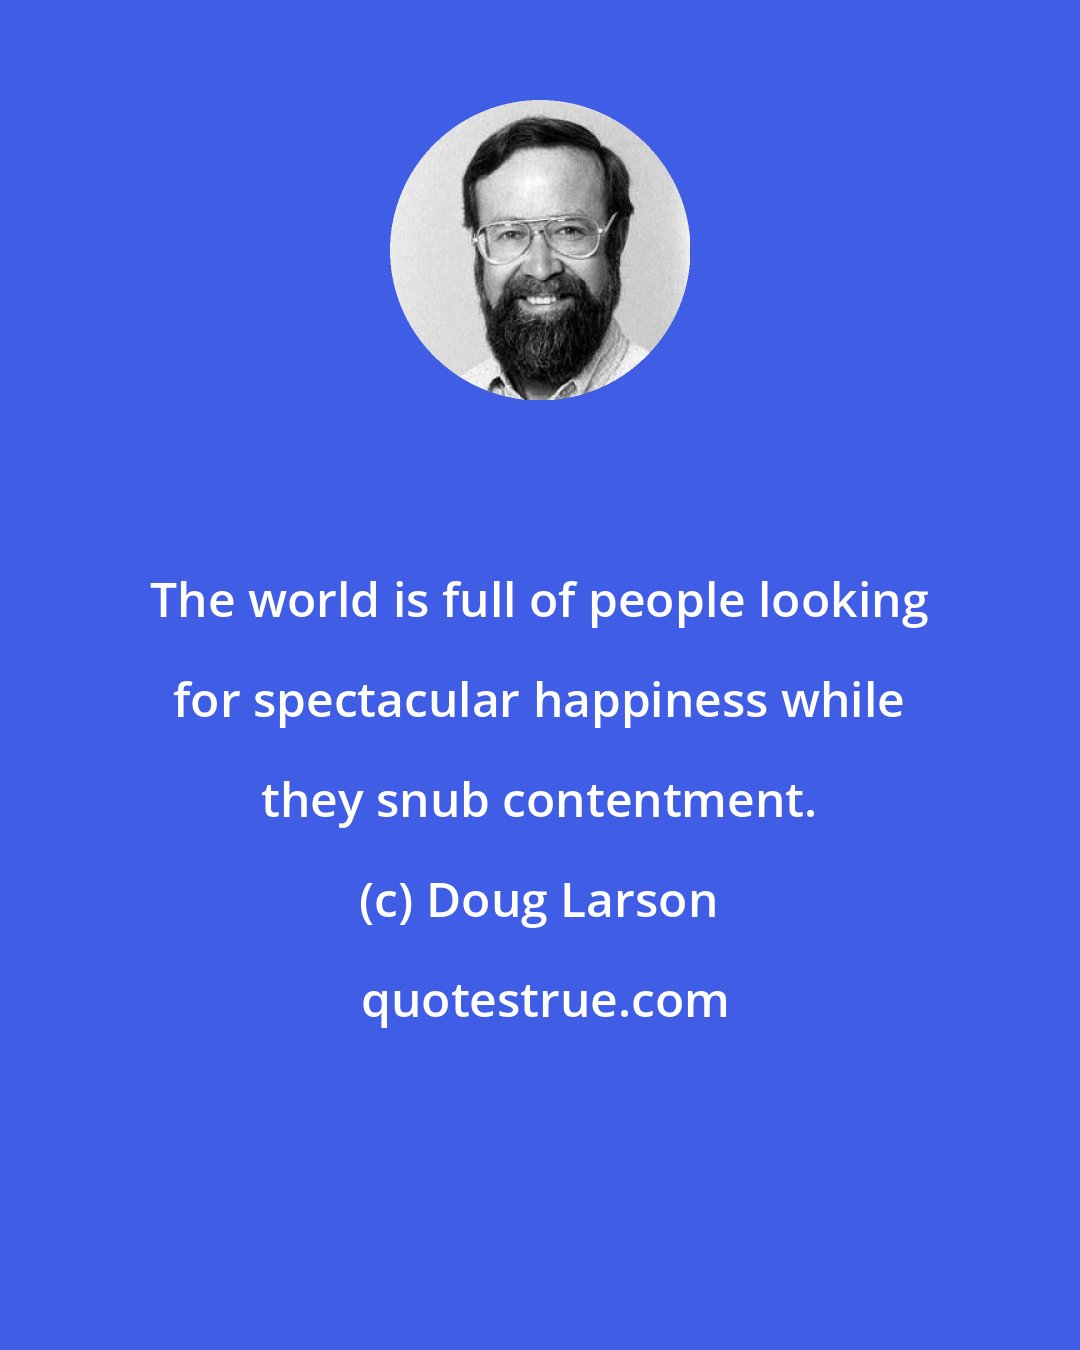 Doug Larson: The world is full of people looking for spectacular happiness while they snub contentment.